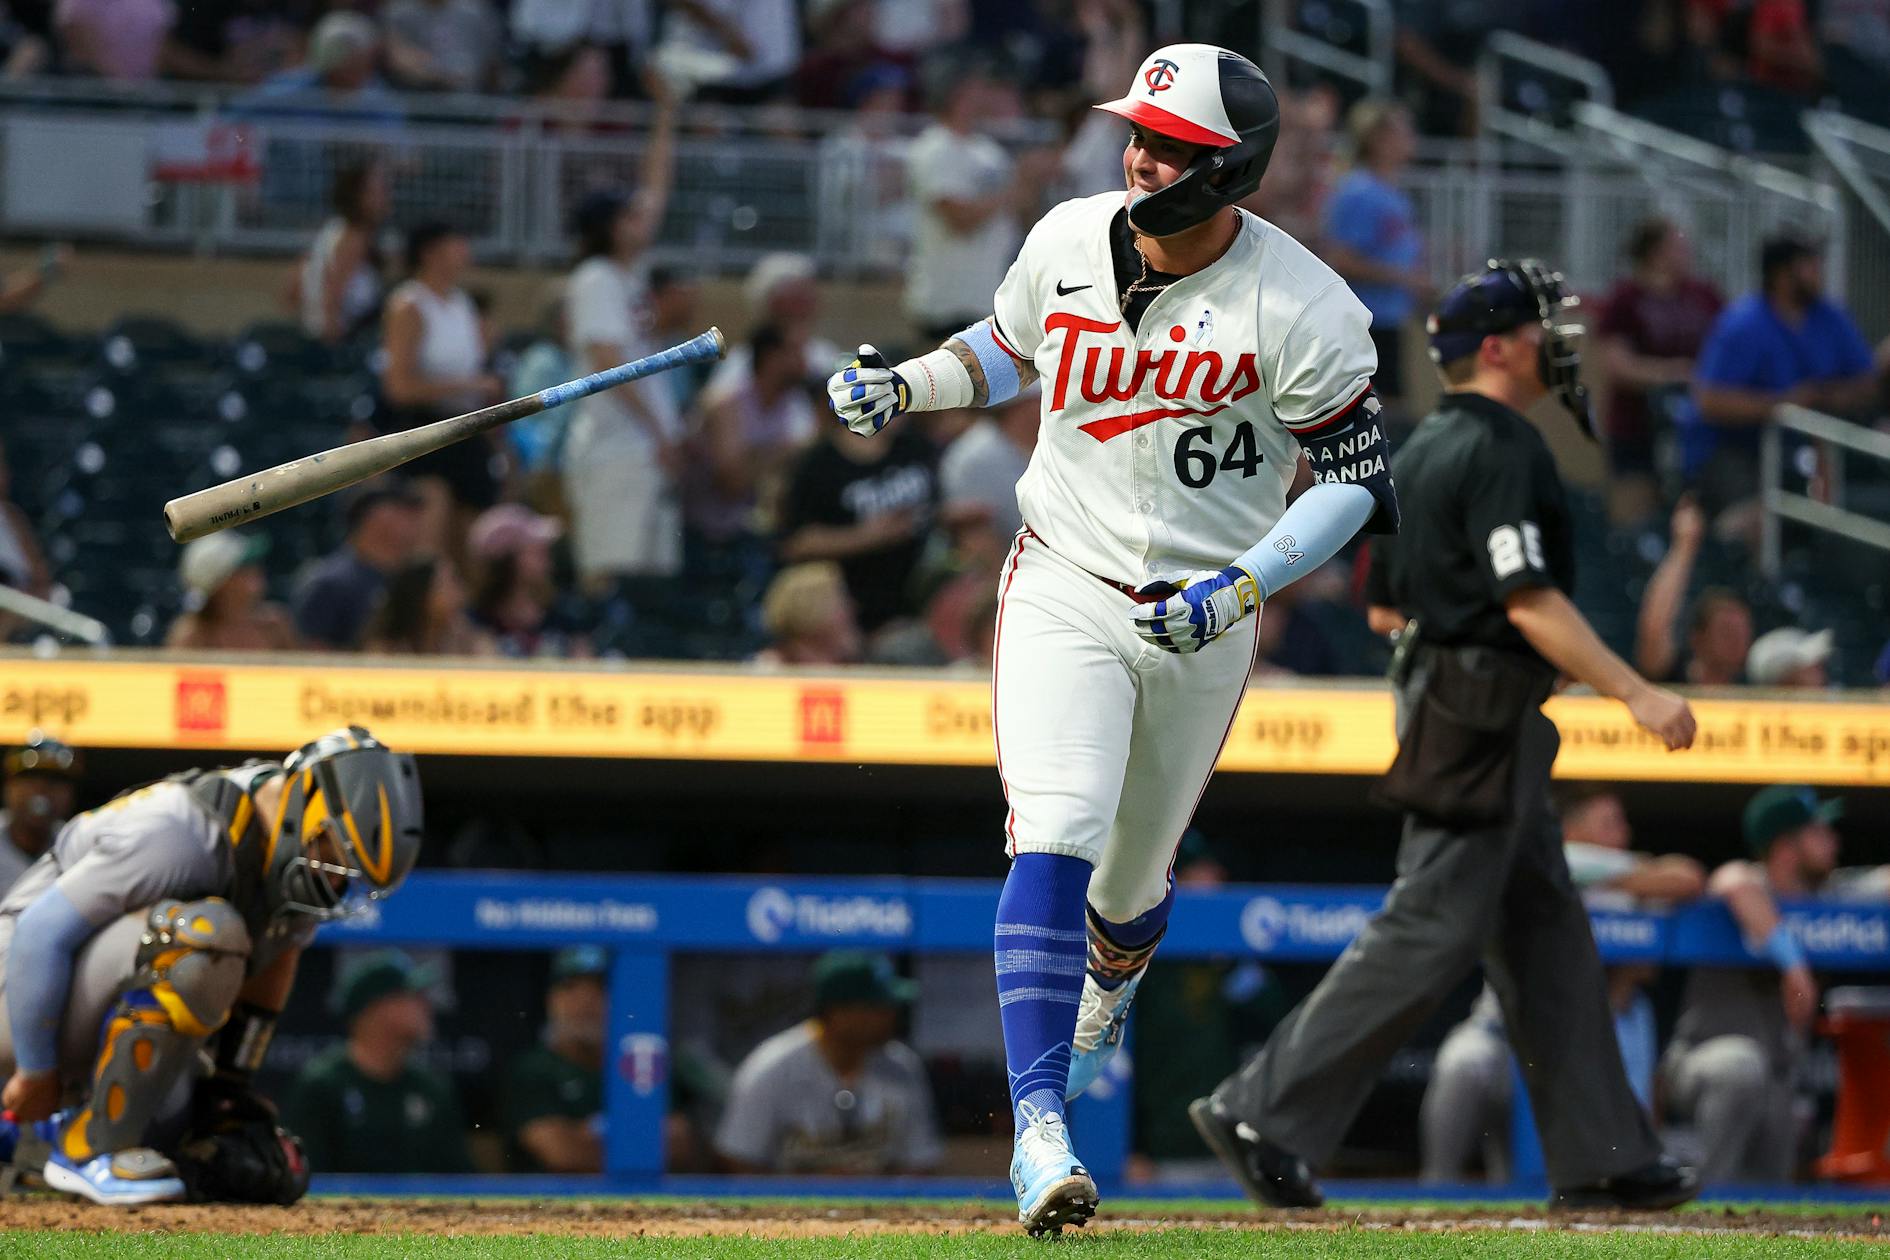 Twins complete doubleheader, series sweep of Athletics behind plenty of power